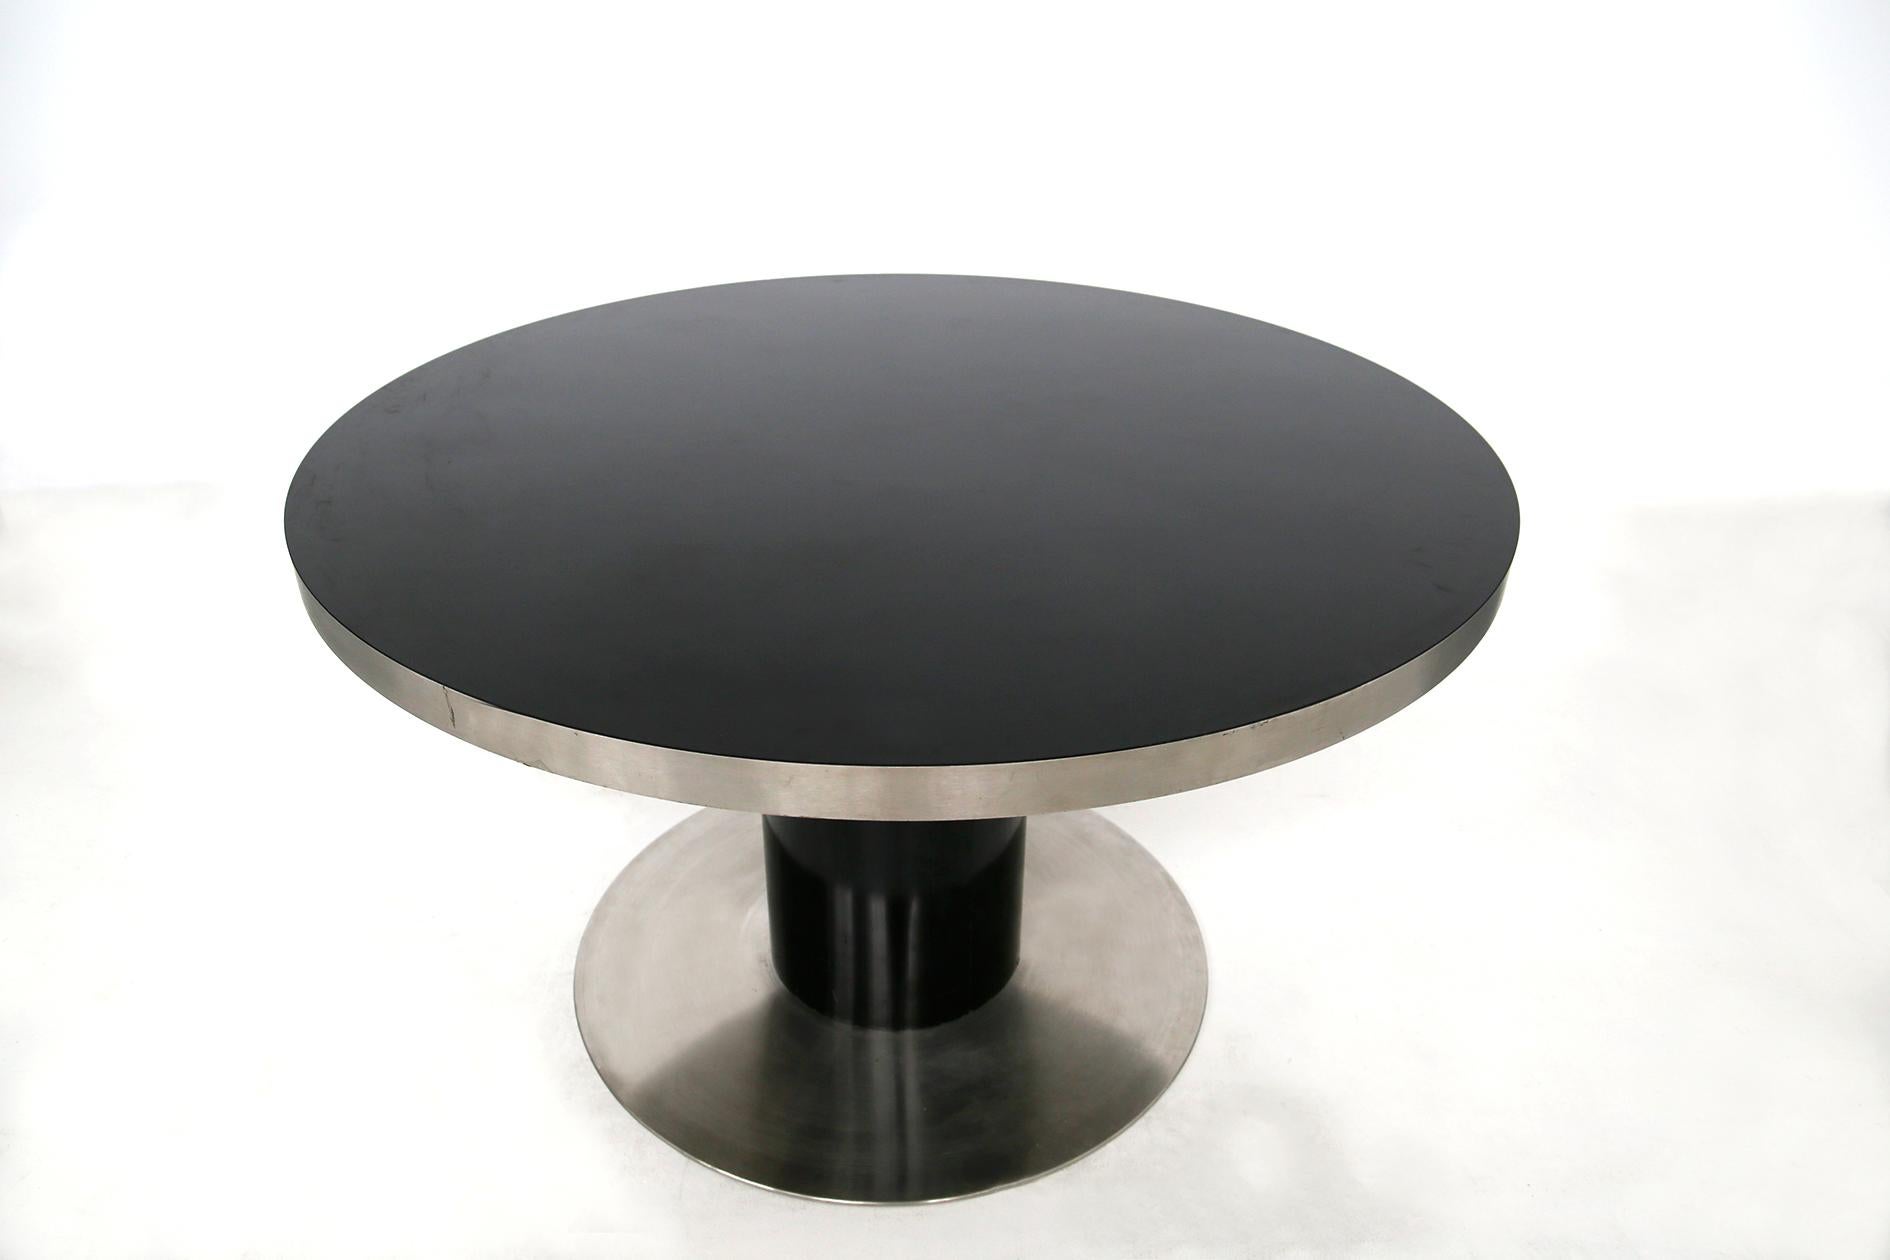 Late 20th Century Italian Pedestal Round Table by Willy Rizzo in Steel and Wood Black, 1970s